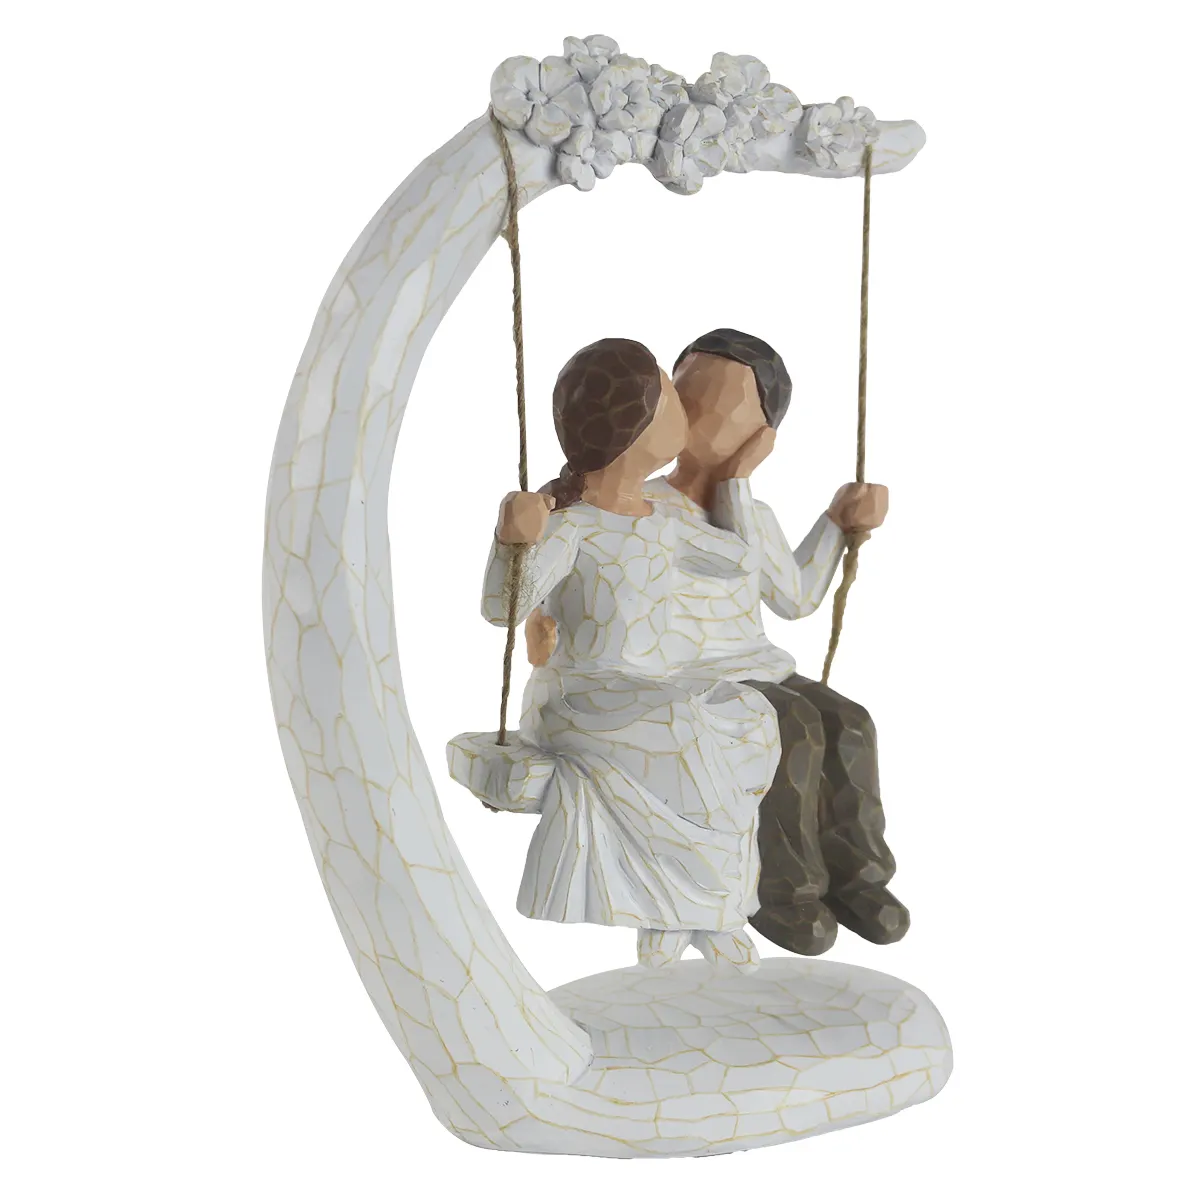 custom made couples swing wedding ornaments artificial resin crafts willow carving for wedding centerpiece & table decoration